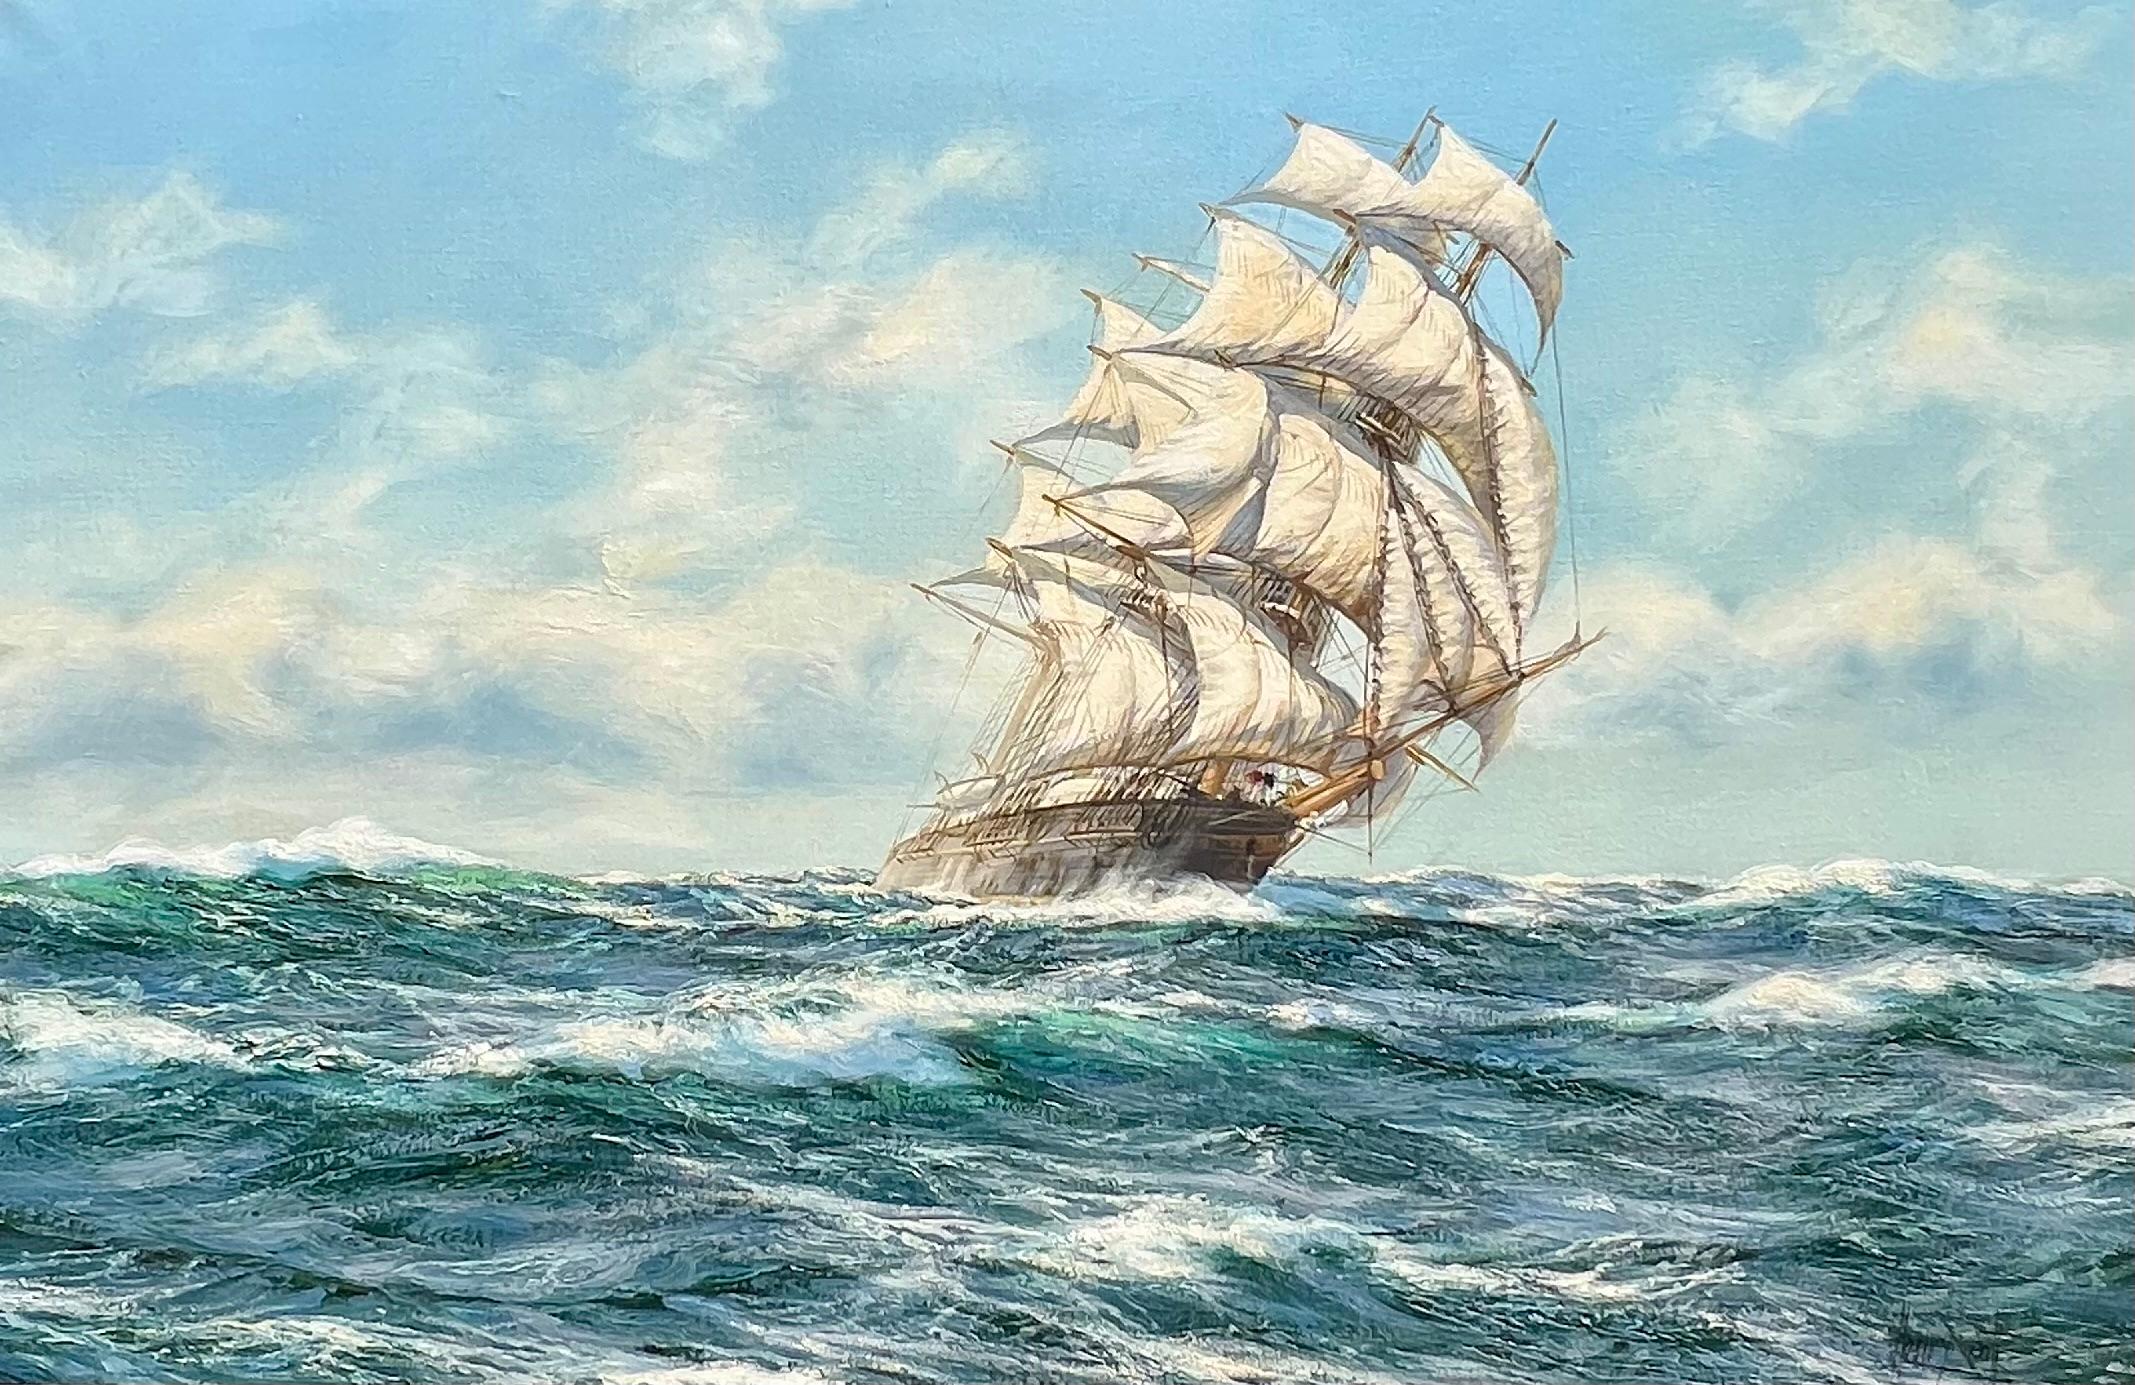 An original oil painting on canvas signed lower left featuring the clipper ship Flying Fish.  

Provenance:
MacConnal-Mason and Son, Ltd. London
Private collection USA
Bradbury Art and Antiques Wiscasset, ME

Flying Fish was a California clipper